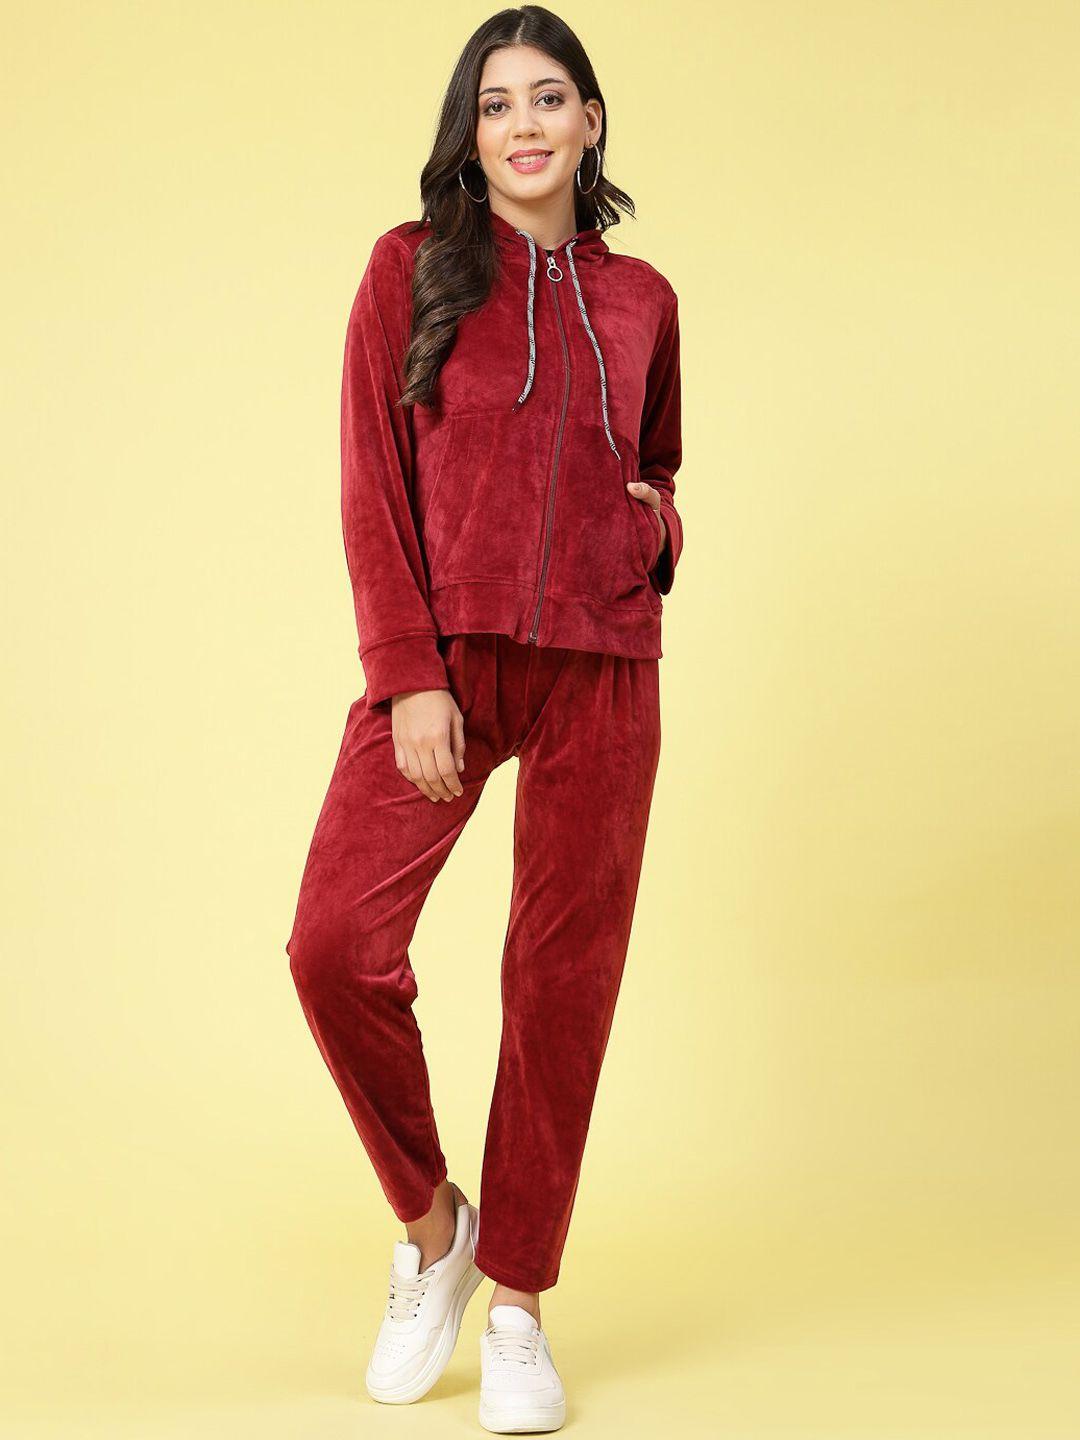 clora creation hooded sweatshirt with trousers